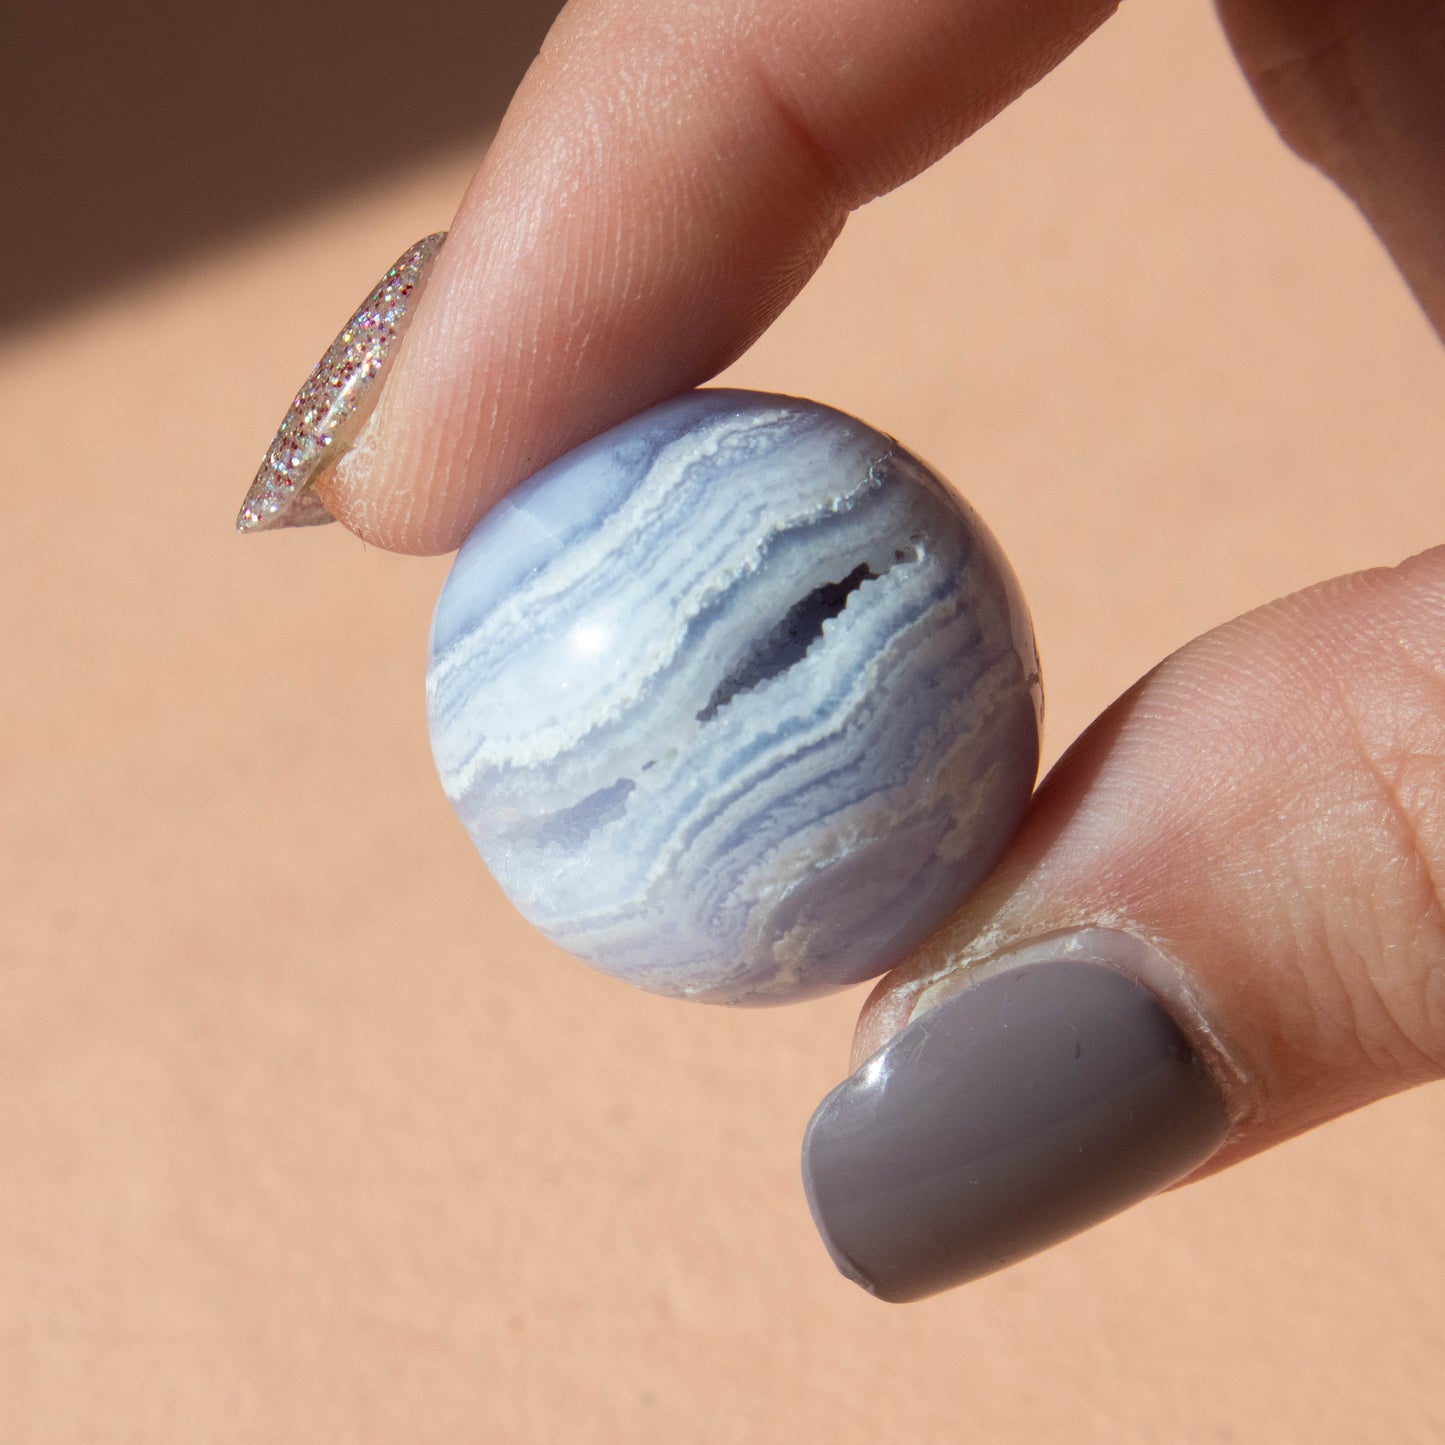 blue lace agate, blue lace agate sphere, crystal sphere, gemstone sphere, blue lace agate crystal, blue lace agate stone, blue lace agate gemstone, blue lace agate properties, blue lace agate healing properties, blue lace agate metaphysical properties, blue lace agate meaning